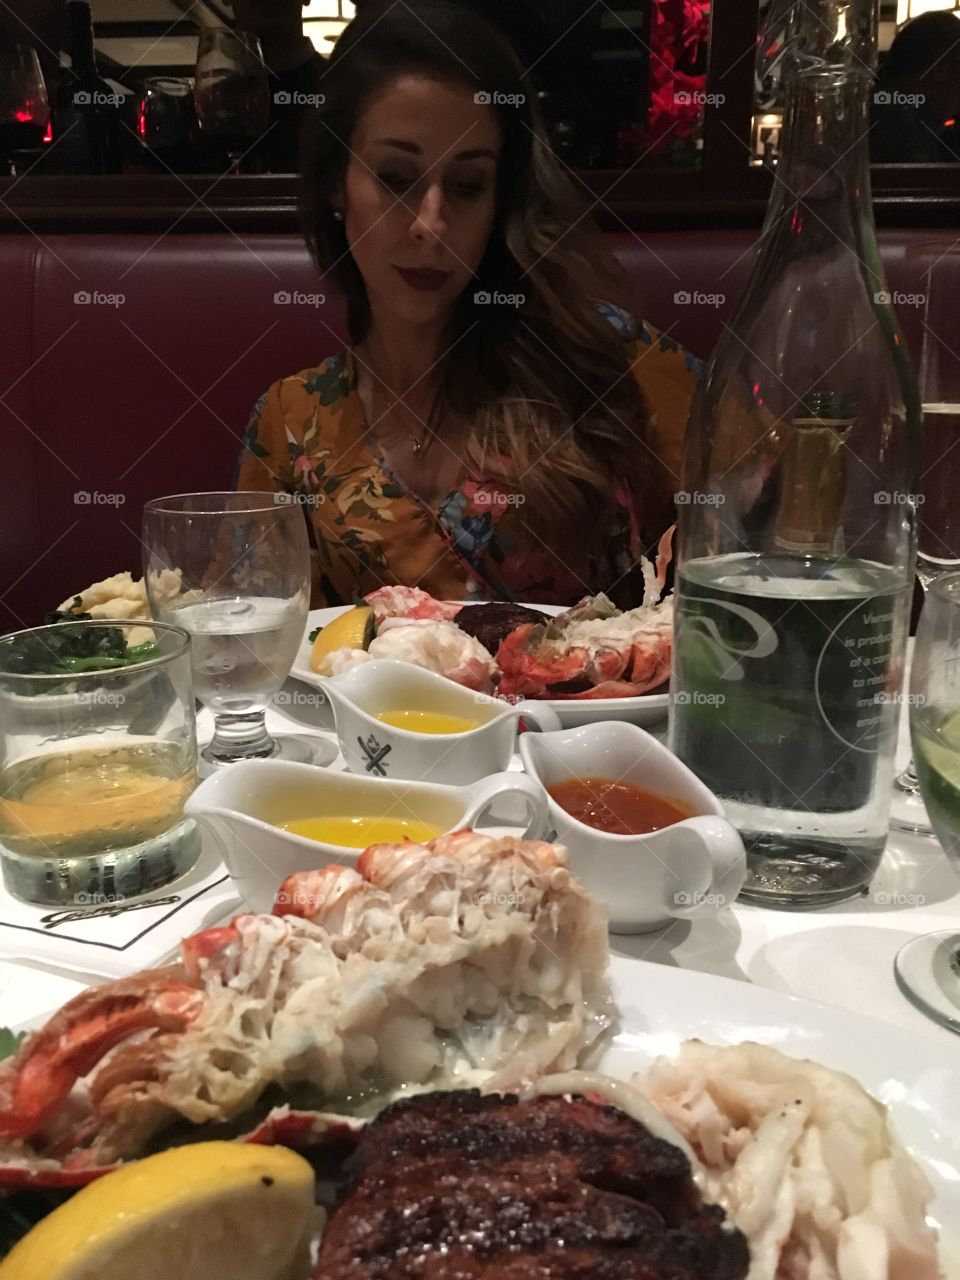 My biggest choice? Lobster or filet first. Red wine and my boyfriends birthday Dinner in NYC at Gallaghers